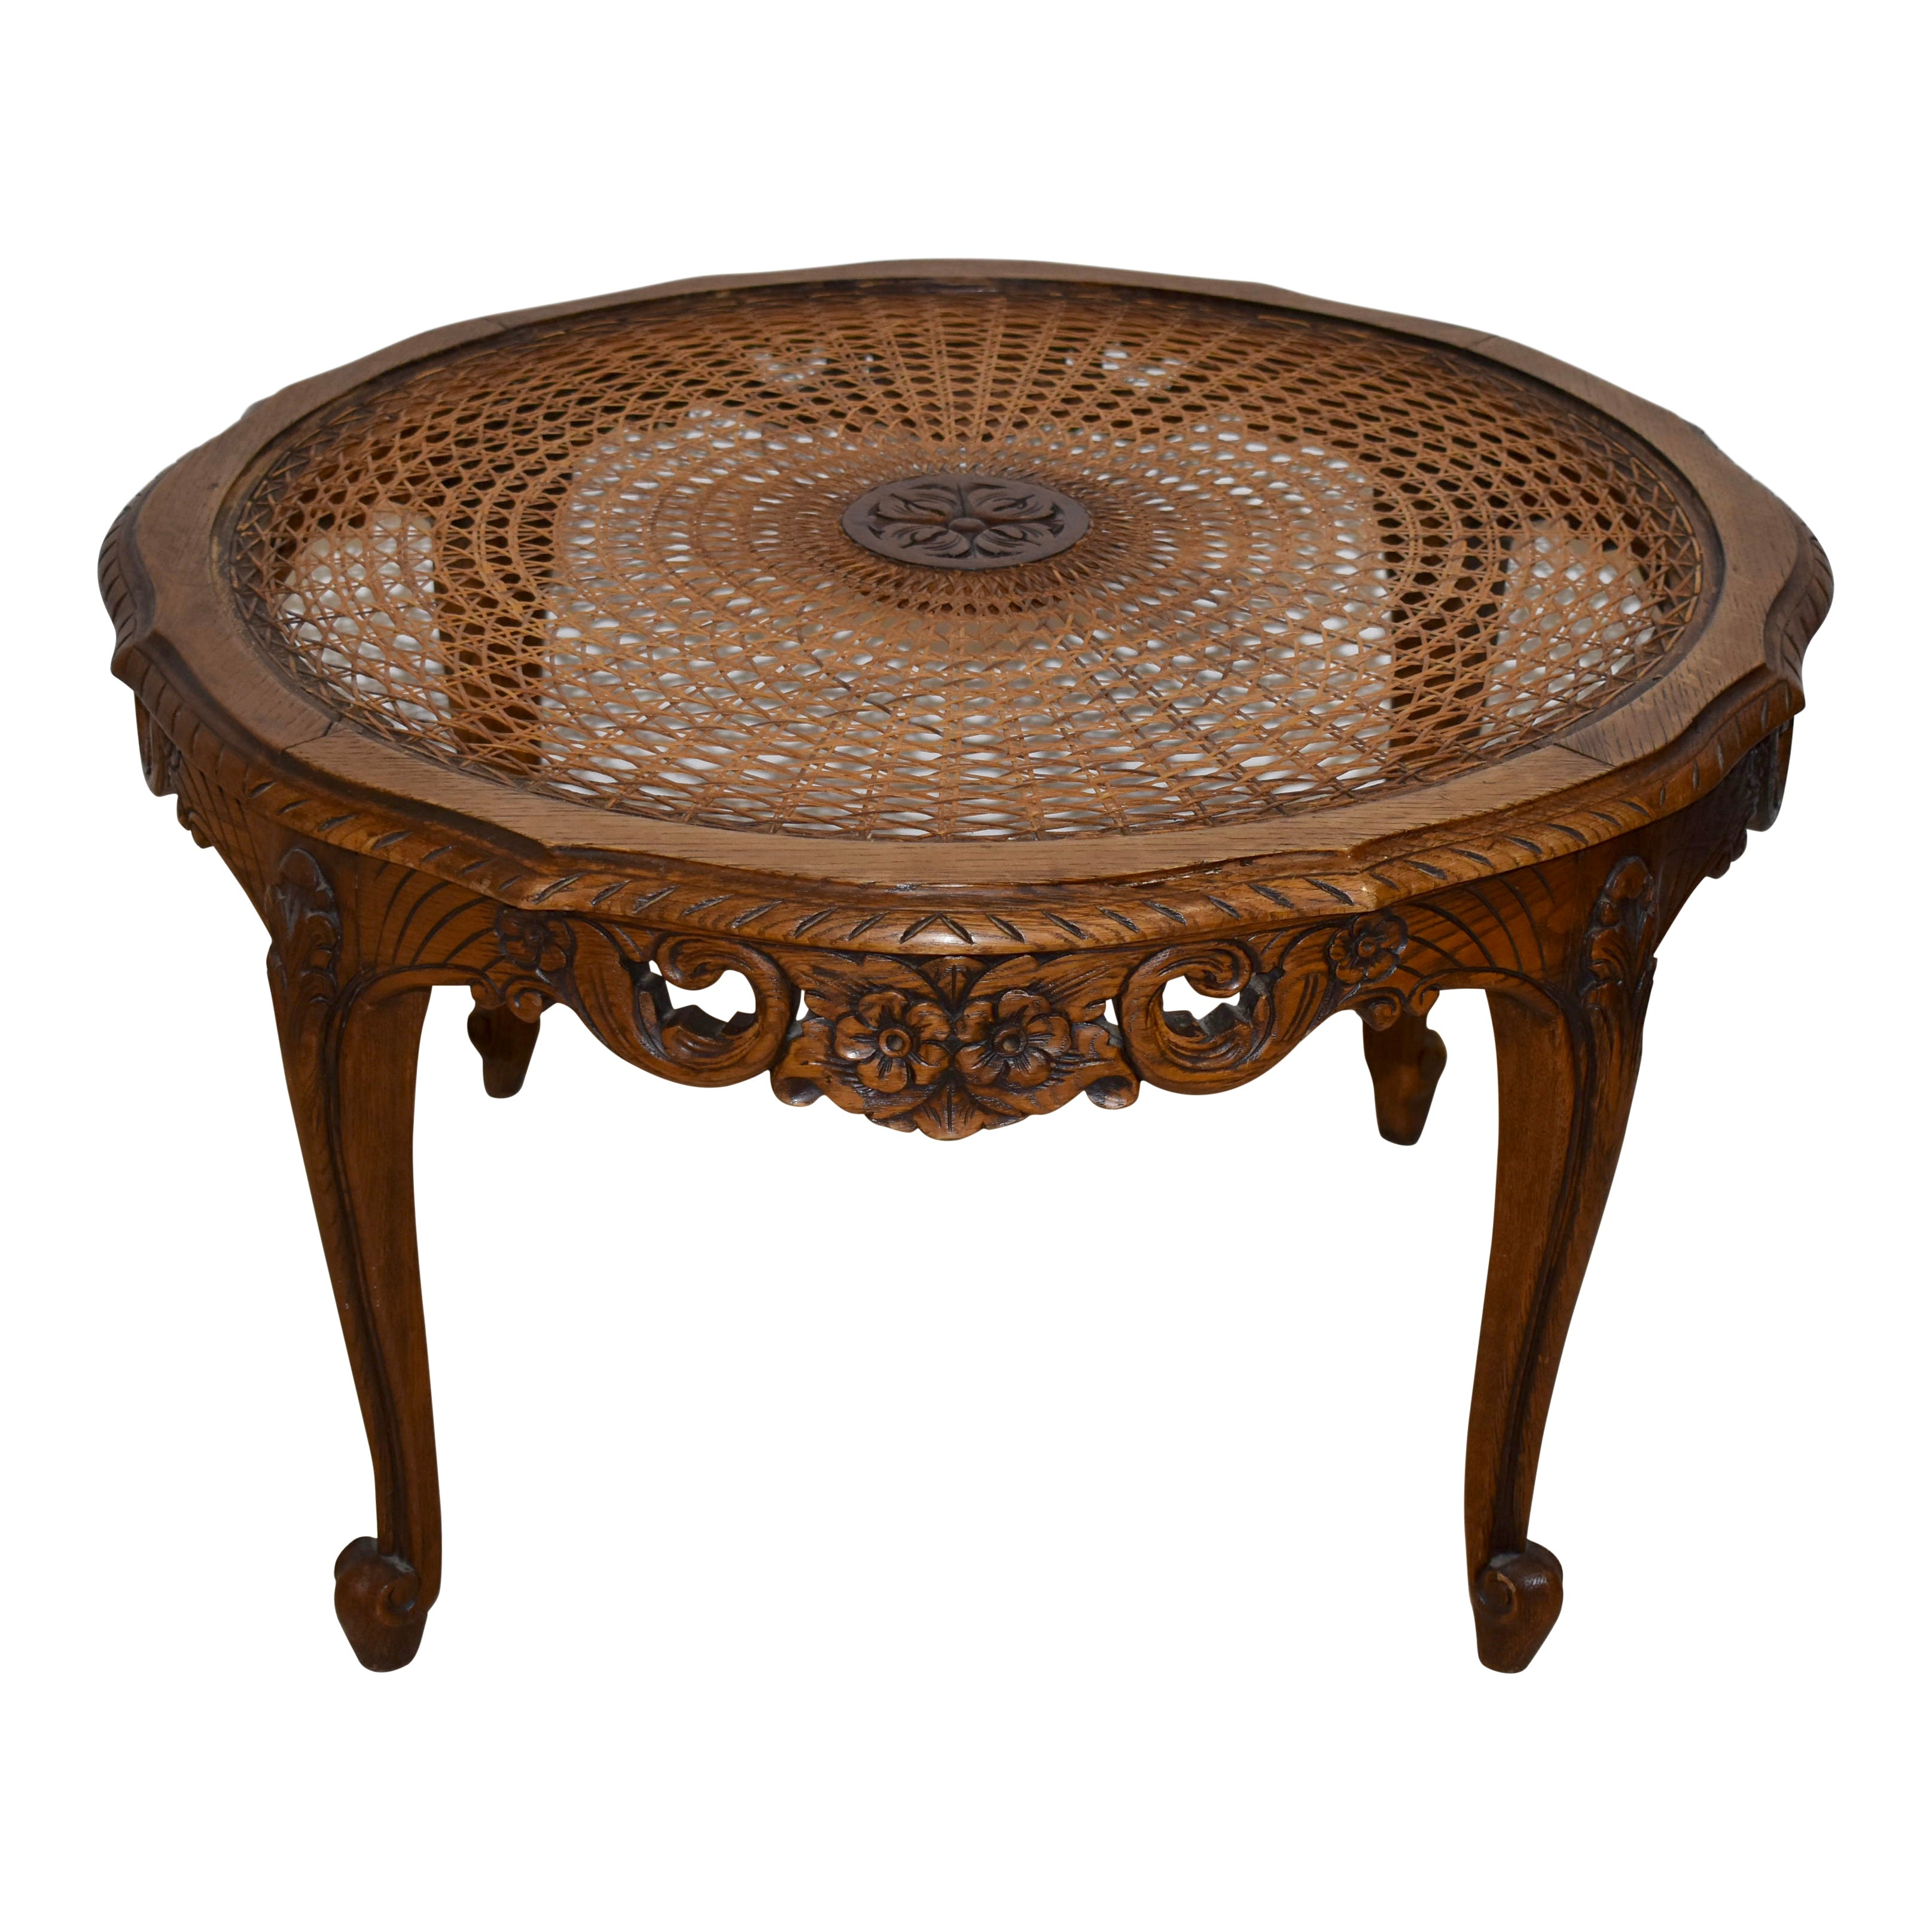 Carved Round Coffee Table with Cane and Glass Top